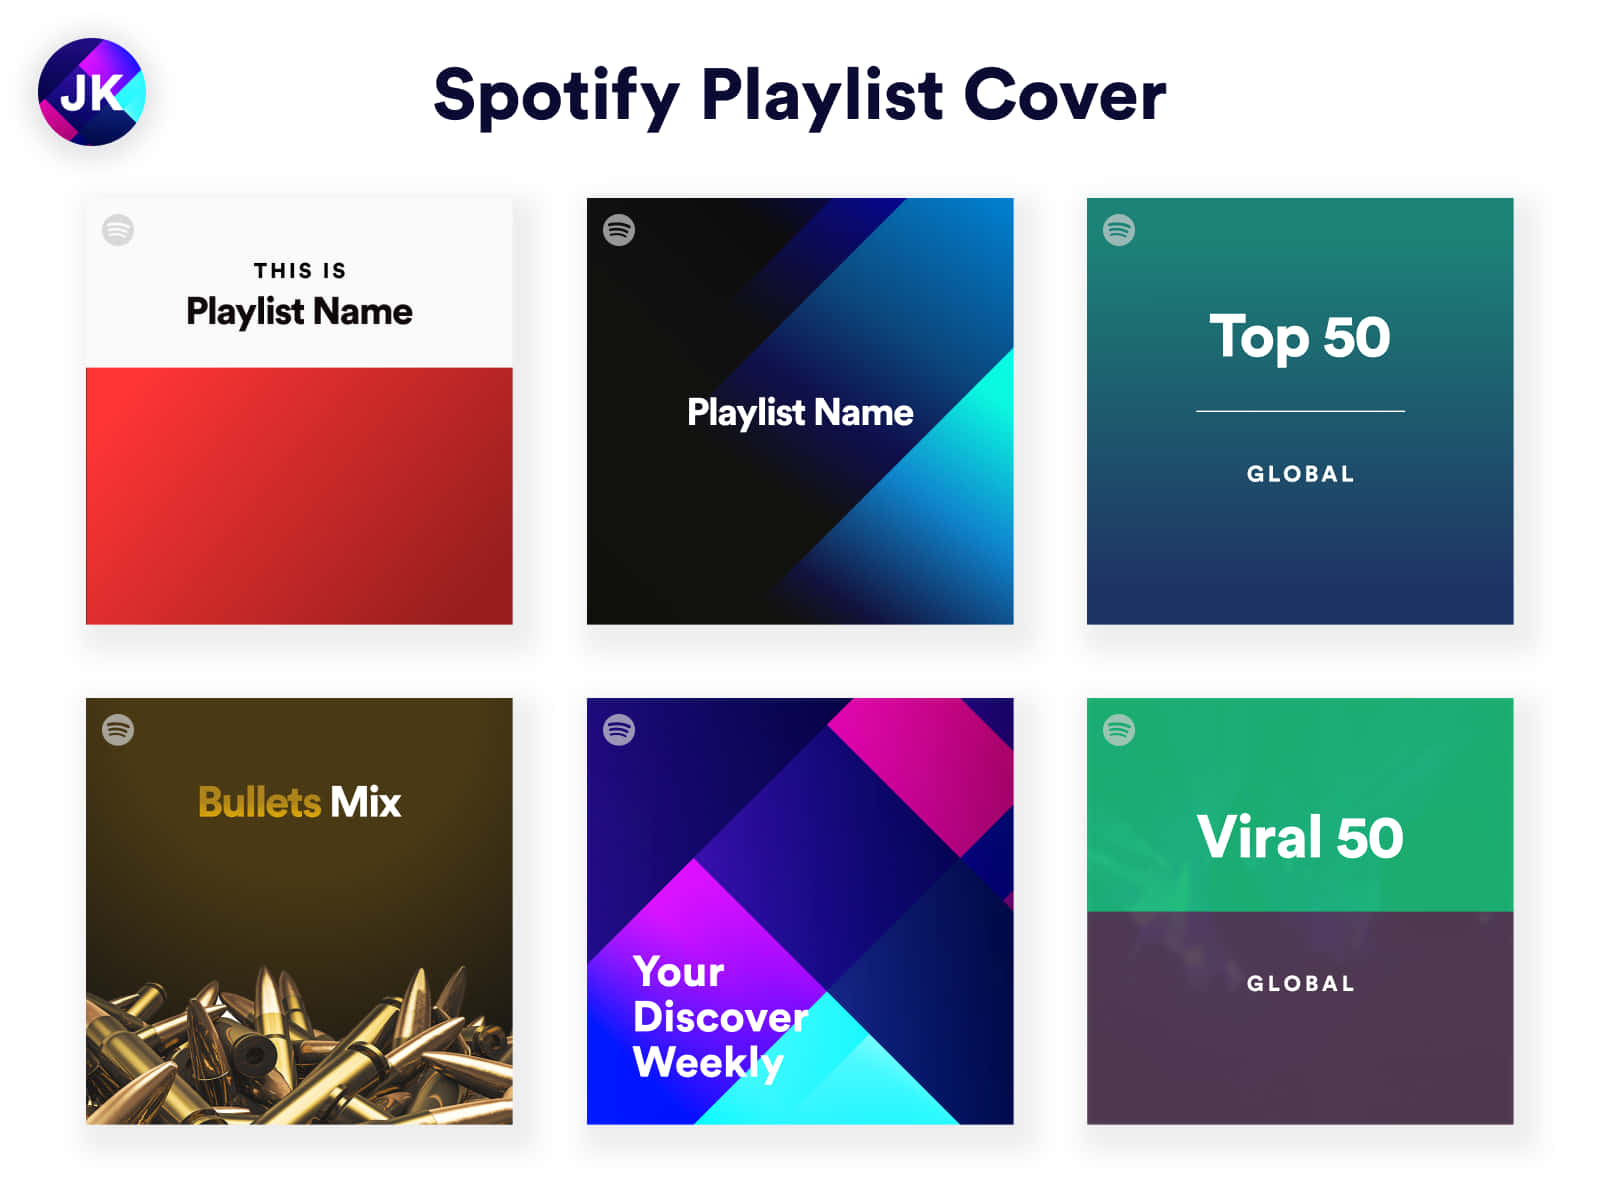 Discover and listen to playlists that capture your mood and inspire you!